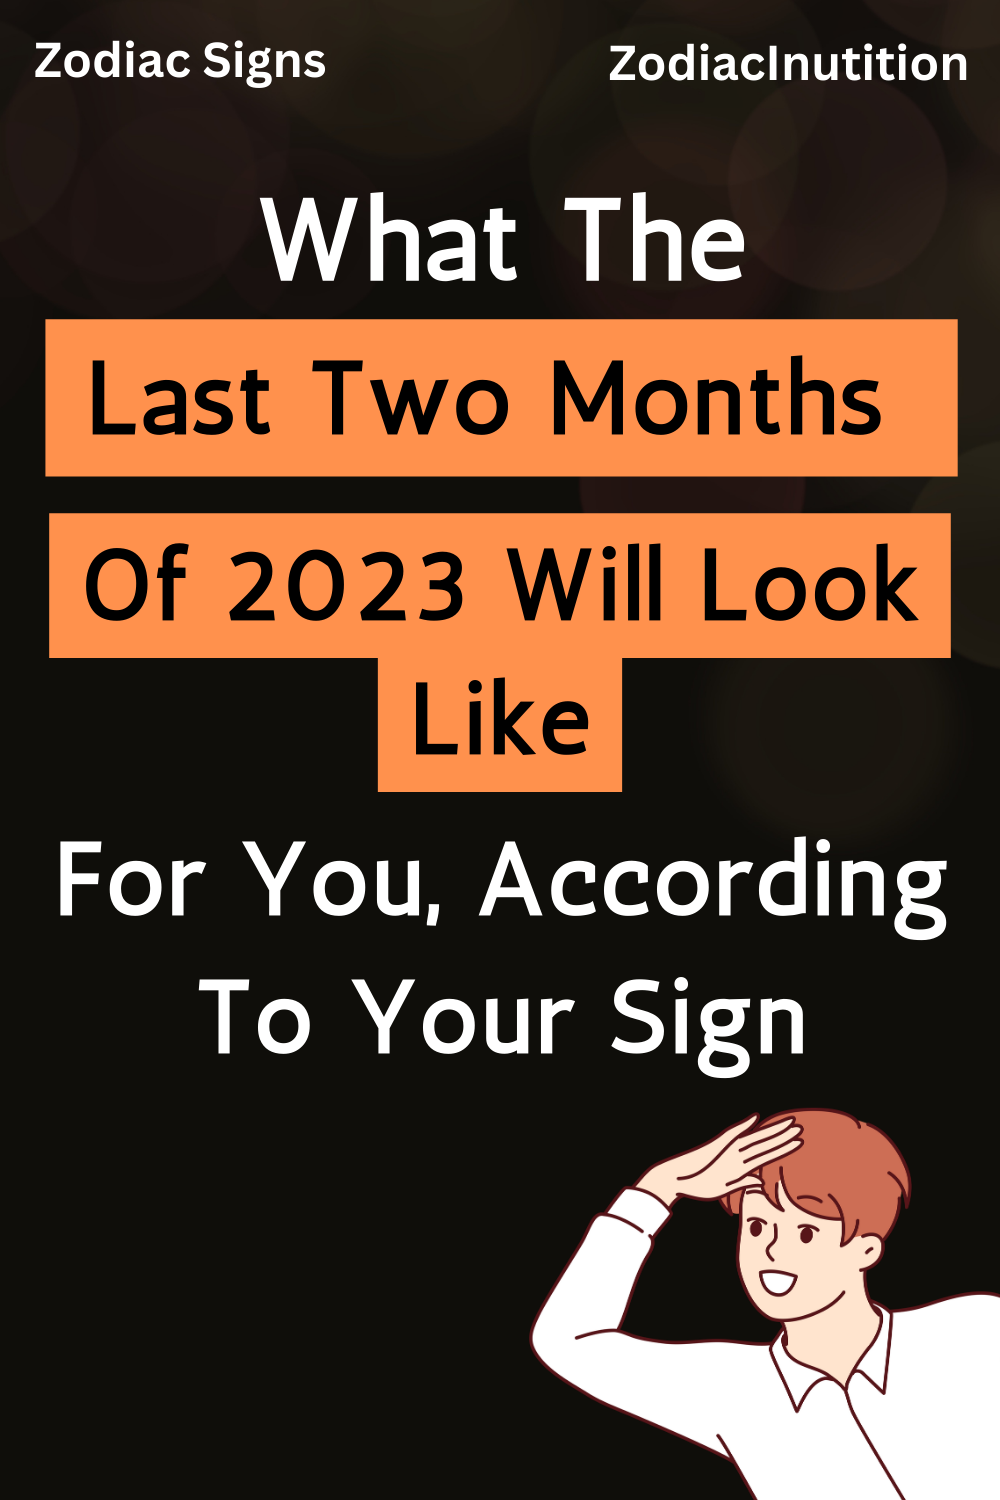 What The Last Two Months Of 2023 Will Look Like For You, According To Your Sign